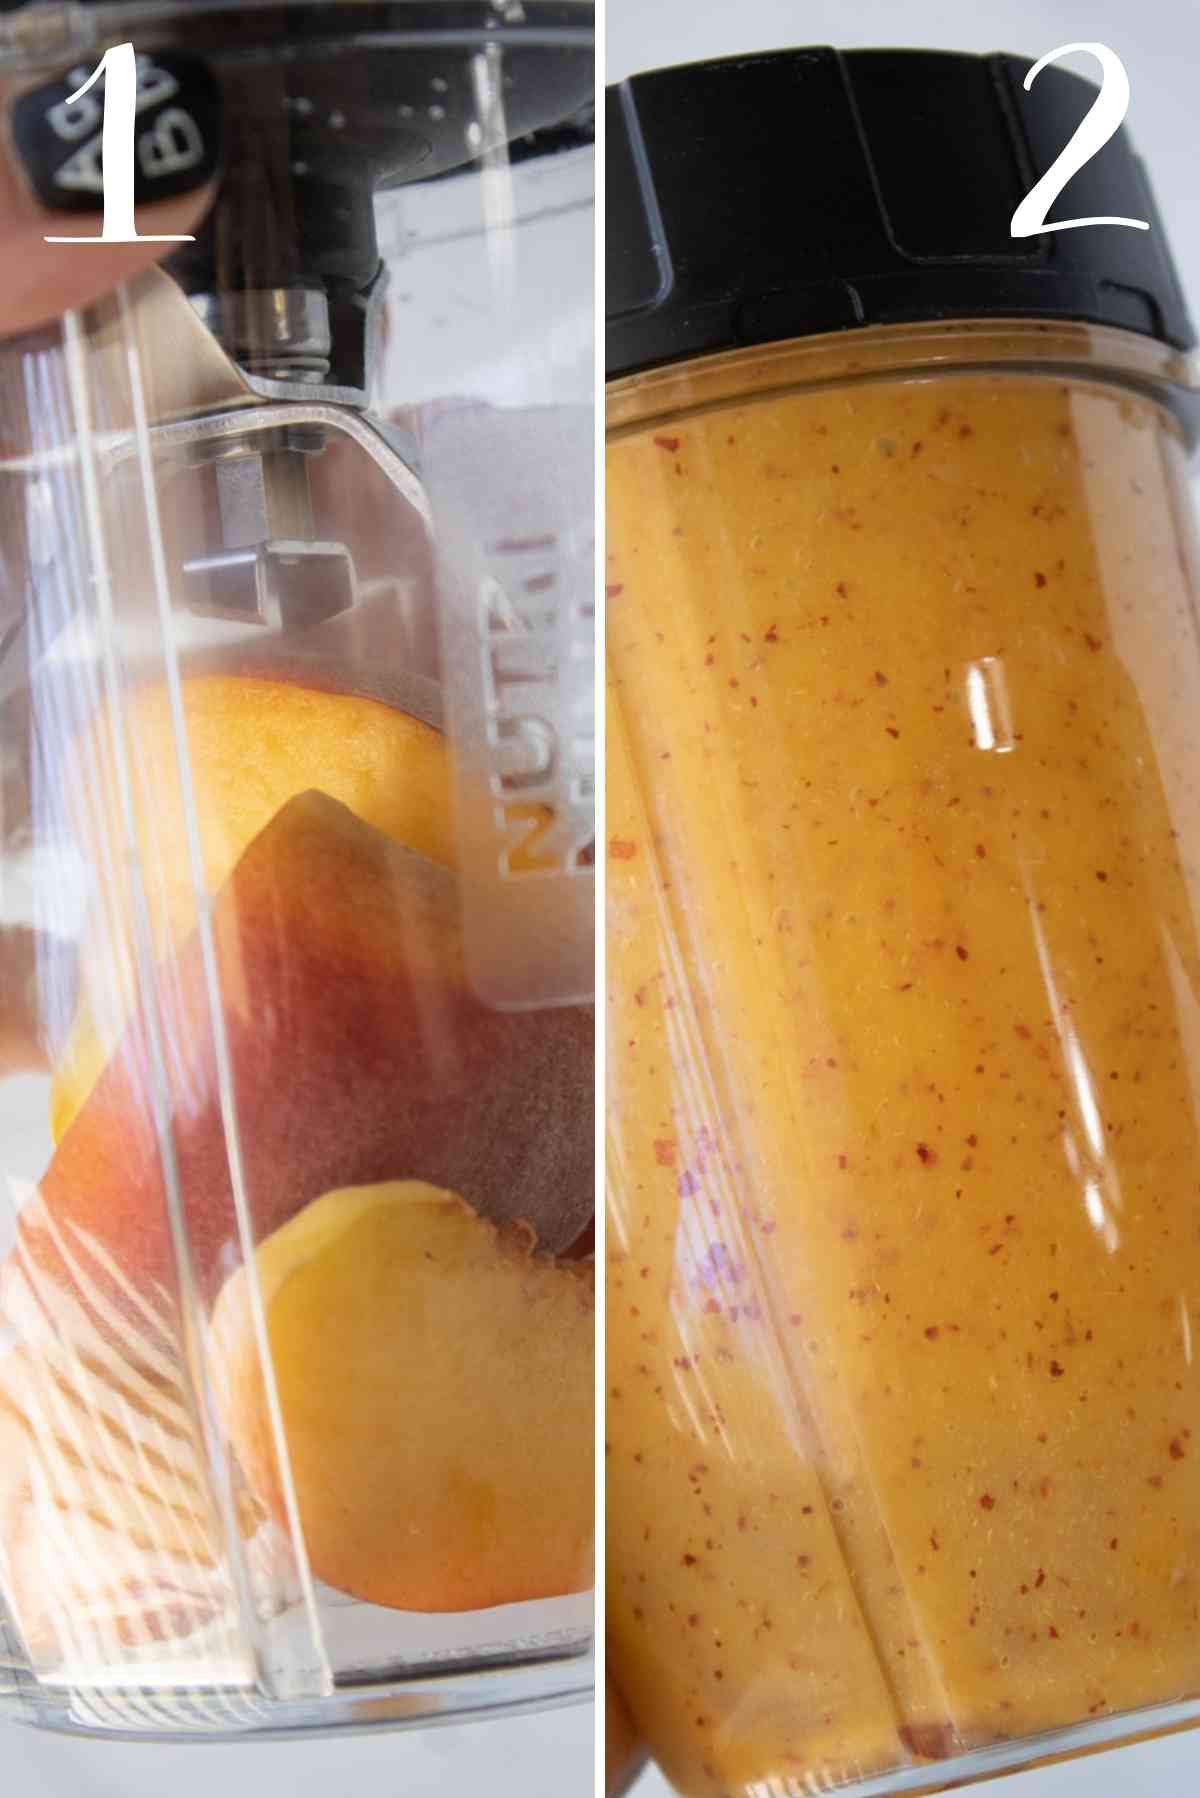 Peaches blended into a puree.